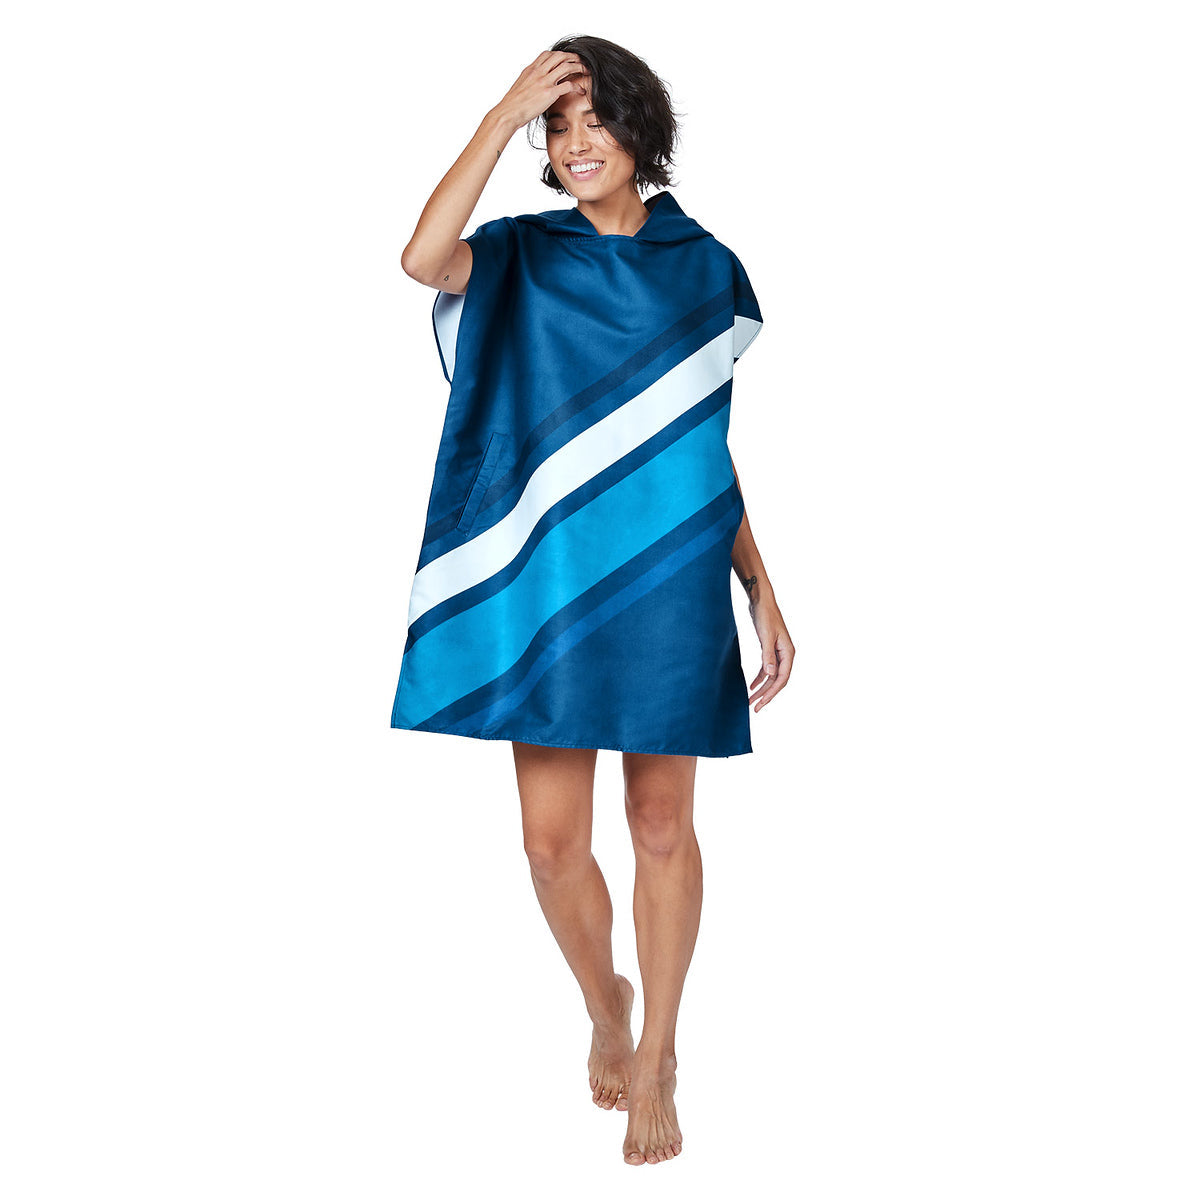 Dock & Bay Adult Poncho - Go Faster - Rapid Navy